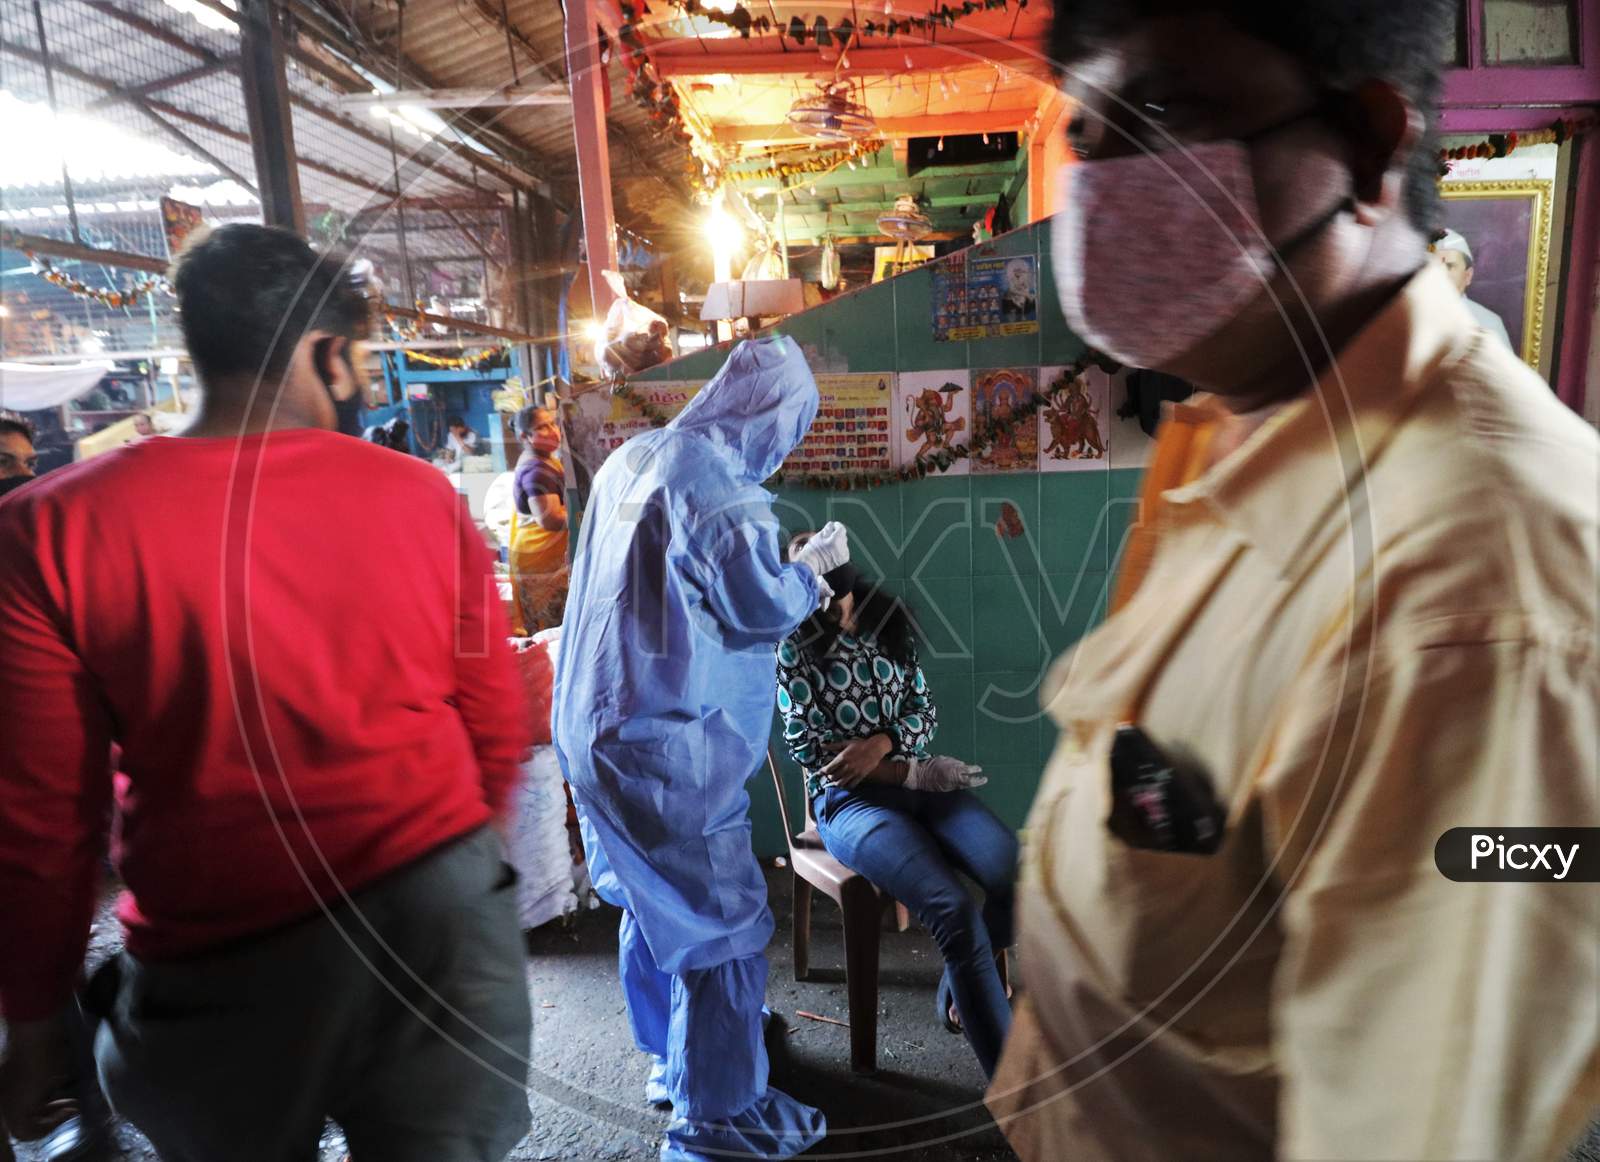 A health worker in personal protective equipment (PPE) collects a swab sample from a woman during a rapid antigen testing campaign for the coronavirus disease (COVID-19), at a vegetable market in Mumbai, India, November 21, 2020.